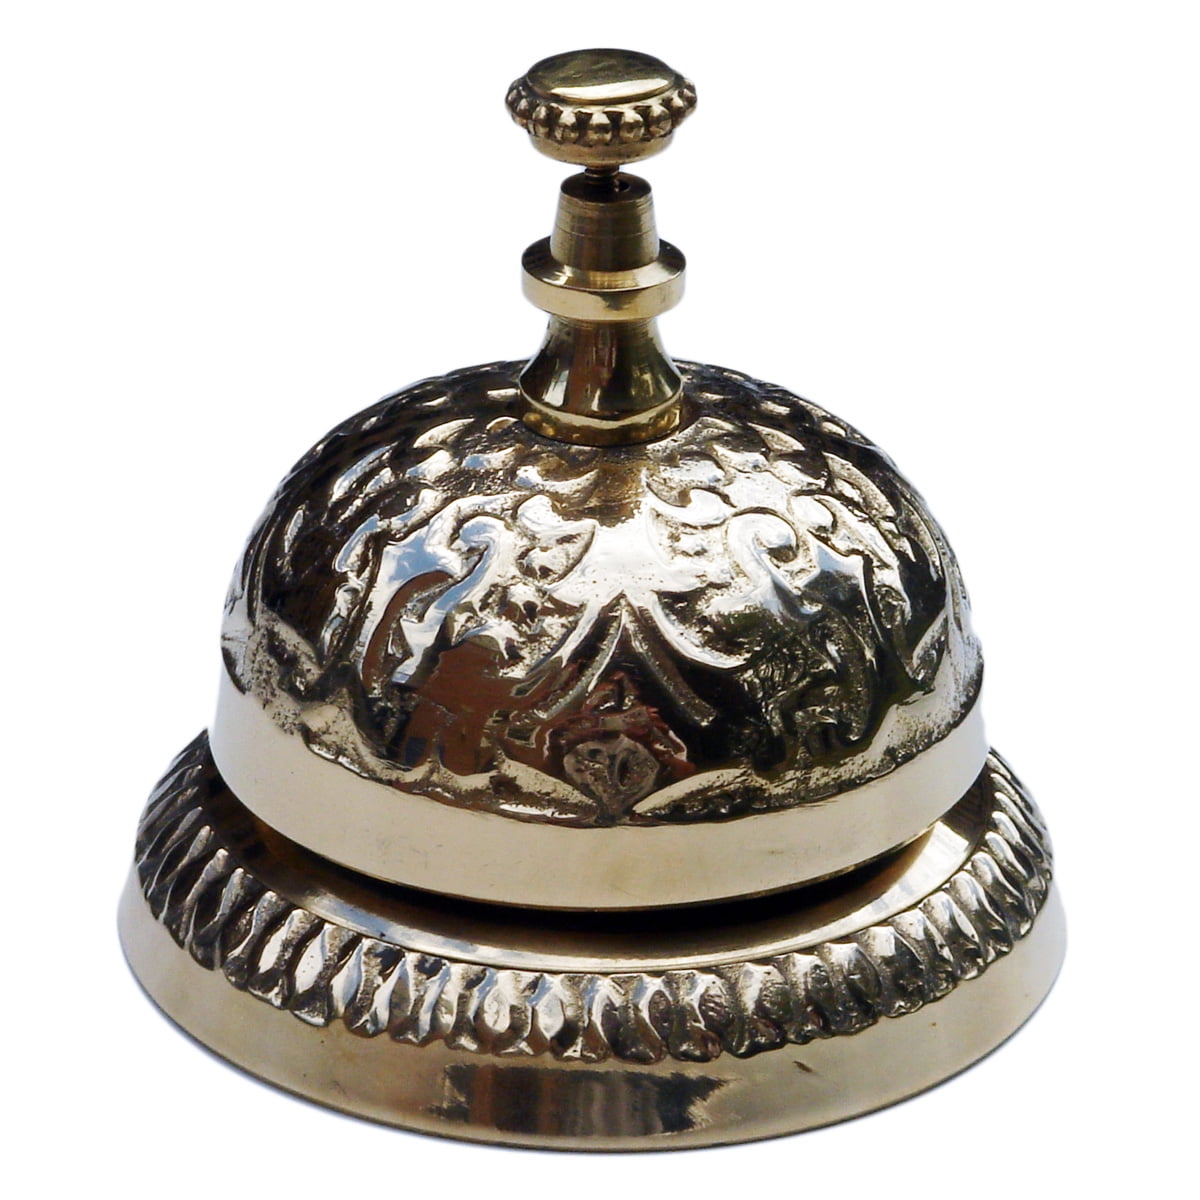 Ornate Solid Brass Hotel Counter Bell Service Desk Bell 